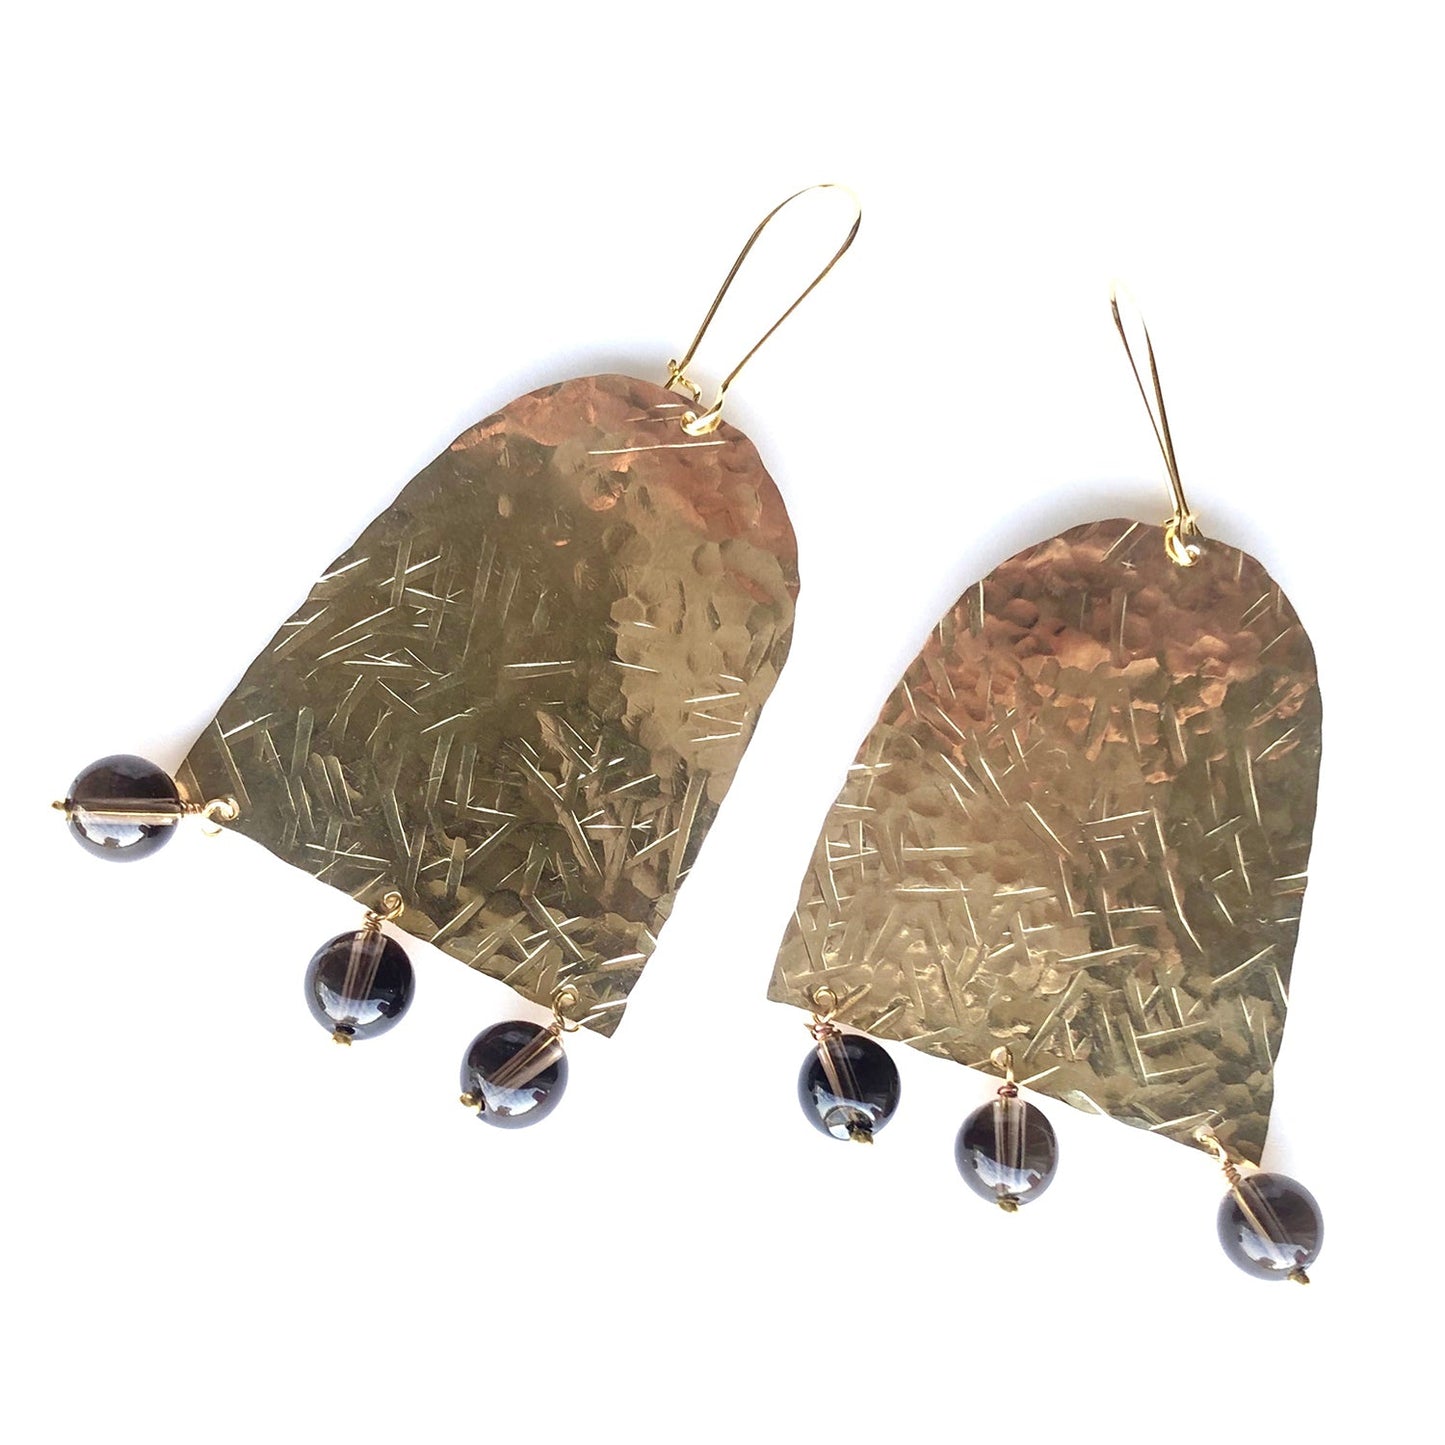 Modern hand hammered earrings with semi precious stone or pearls